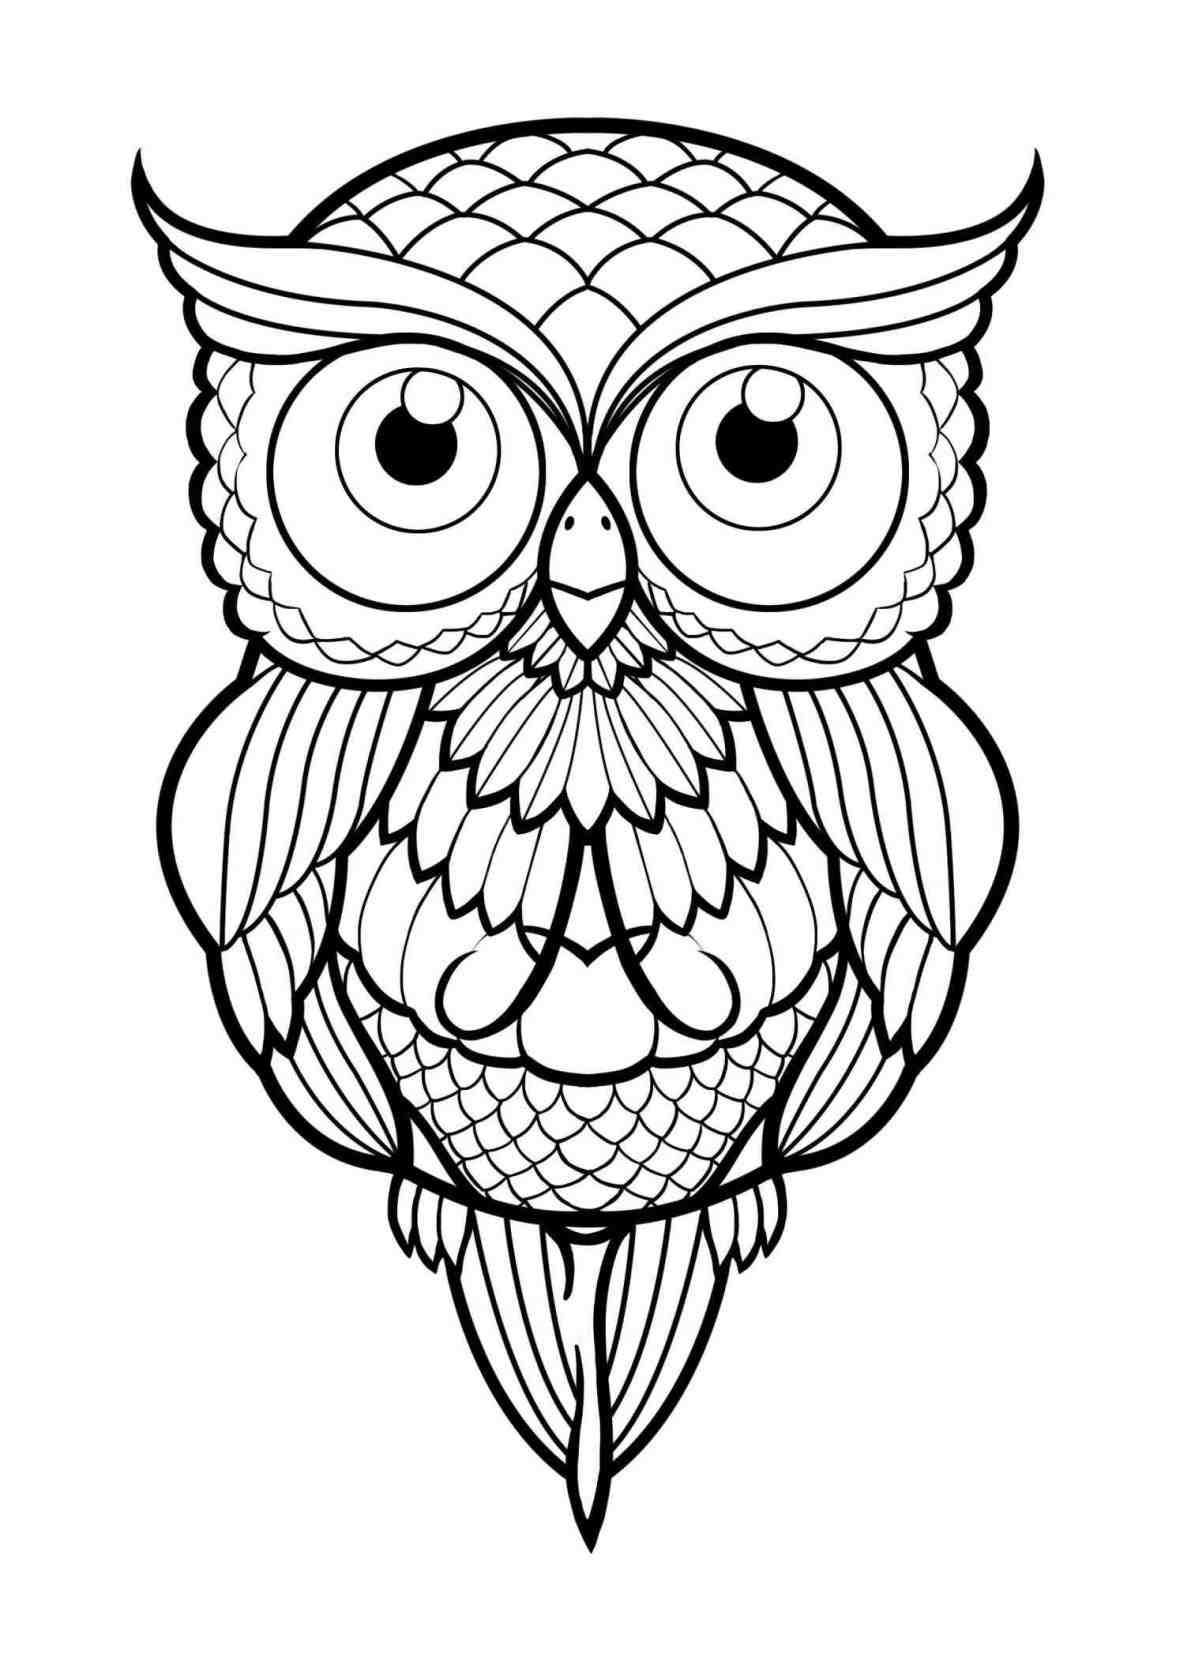 My love Owl | Owls drawing, Owl coloring pages, Cute owl drawing